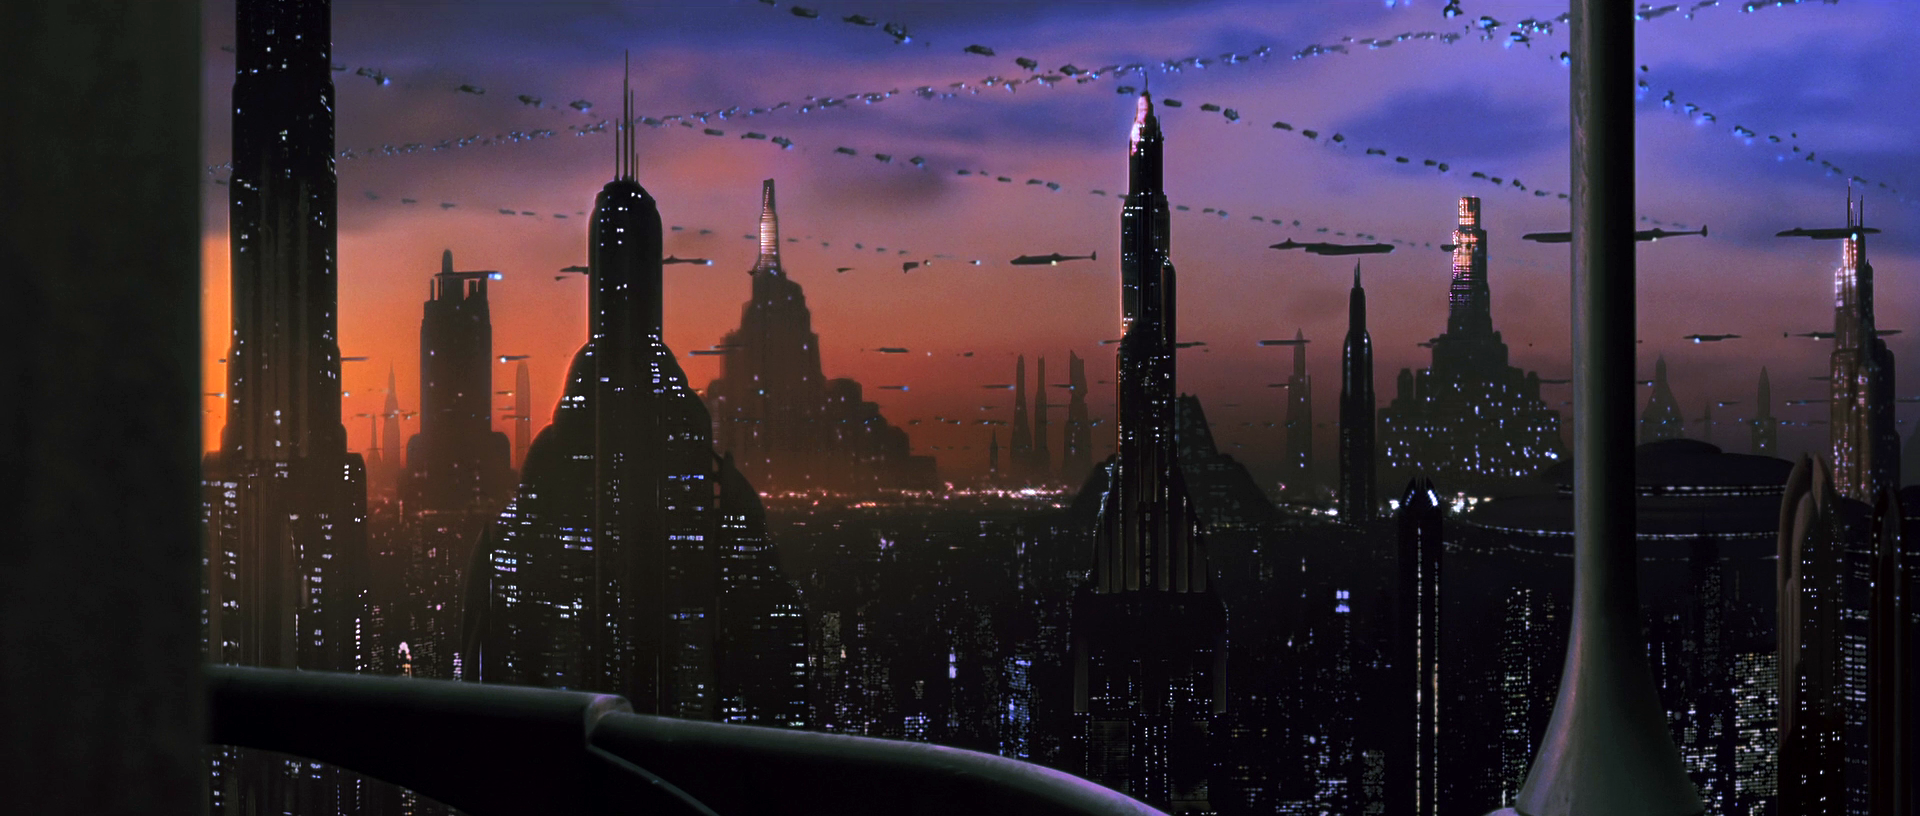 346-3461784_coruscant-from-star-wars.png